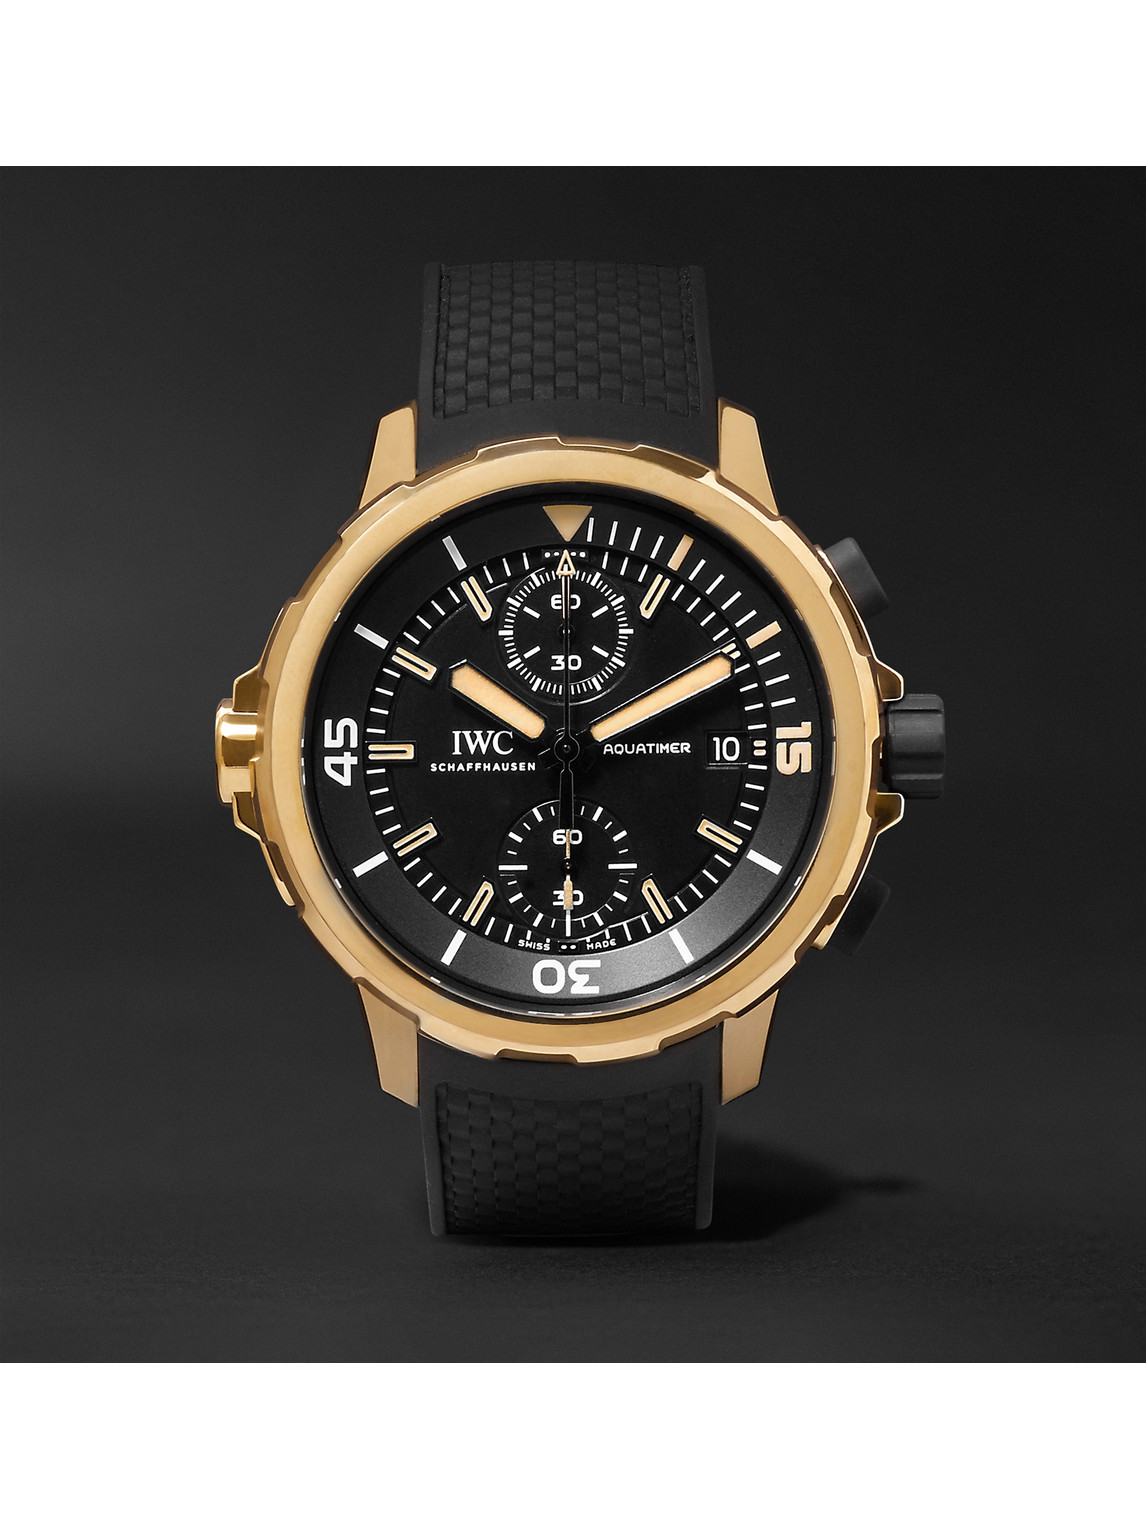 Aquatimer Expedition Charles Darwin Automatic Chronograph 44mm Bronze and Rubber Watch, Ref. No. IW379503